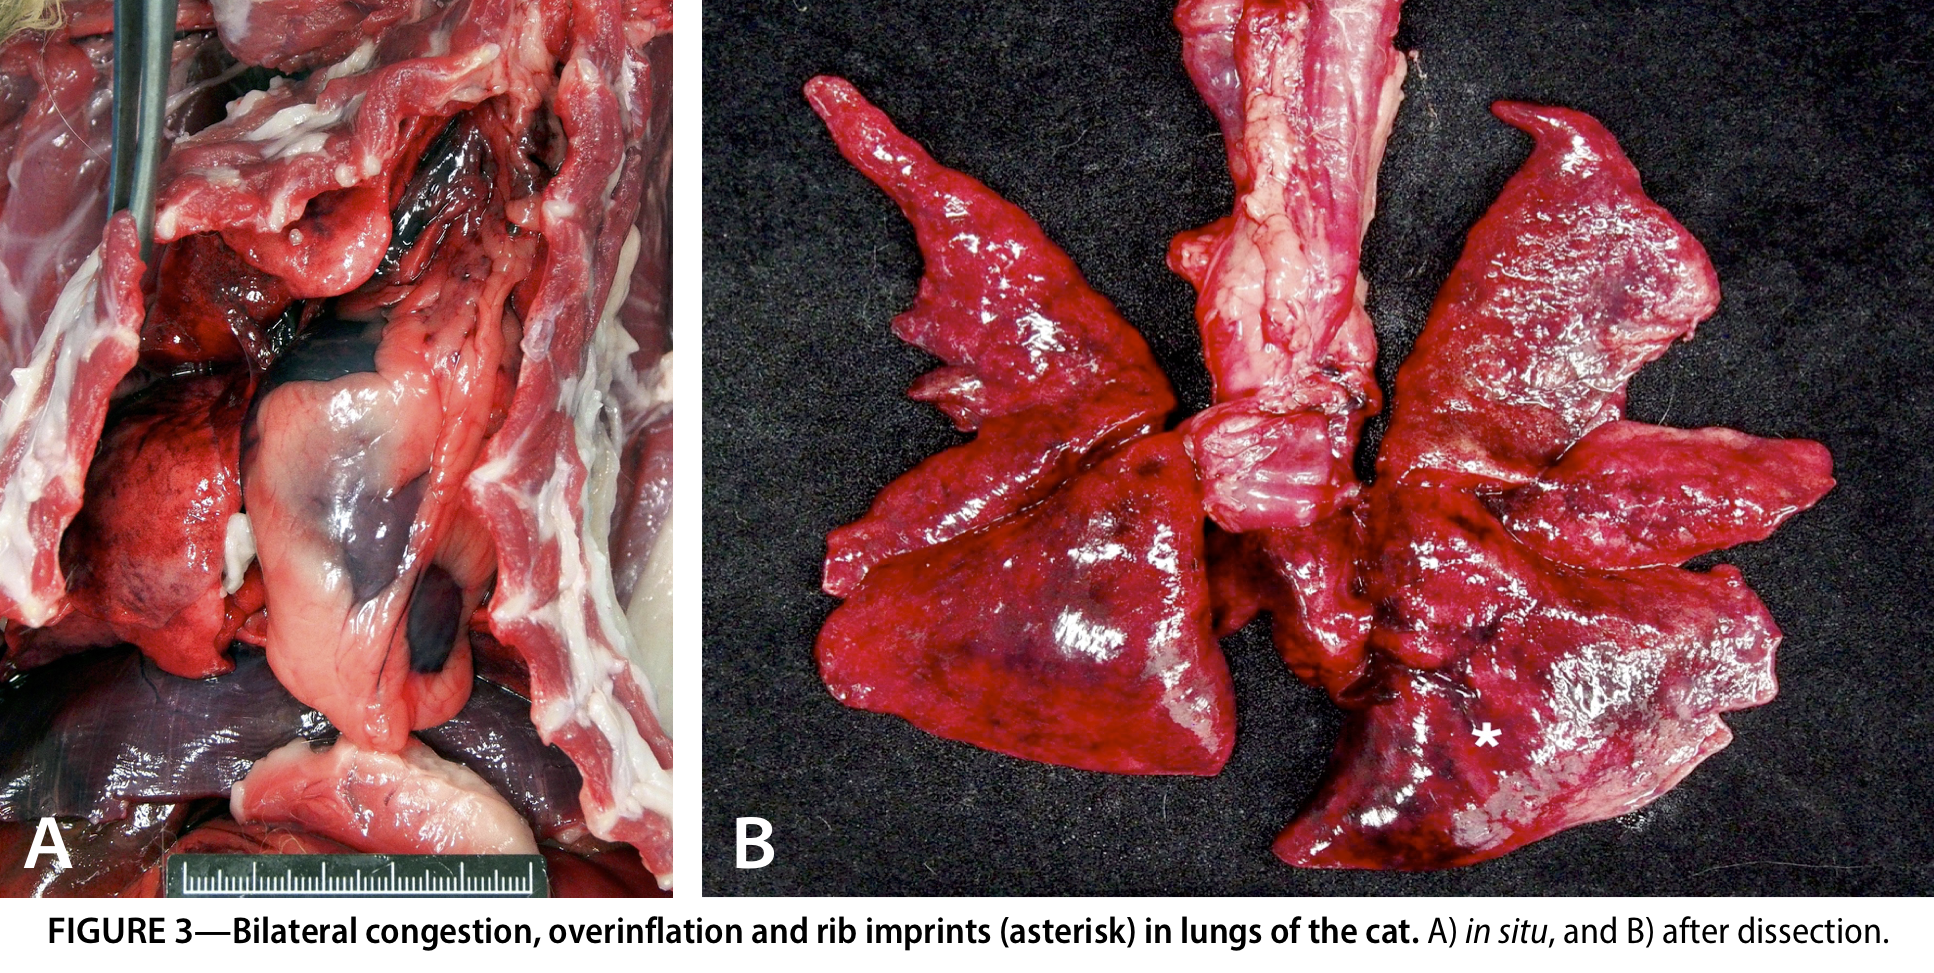 Figure 3—Bilateral congestion, overinflation and rib imprints (asterisk) in lungs of the cat. A) in situ, and B) after dissection.